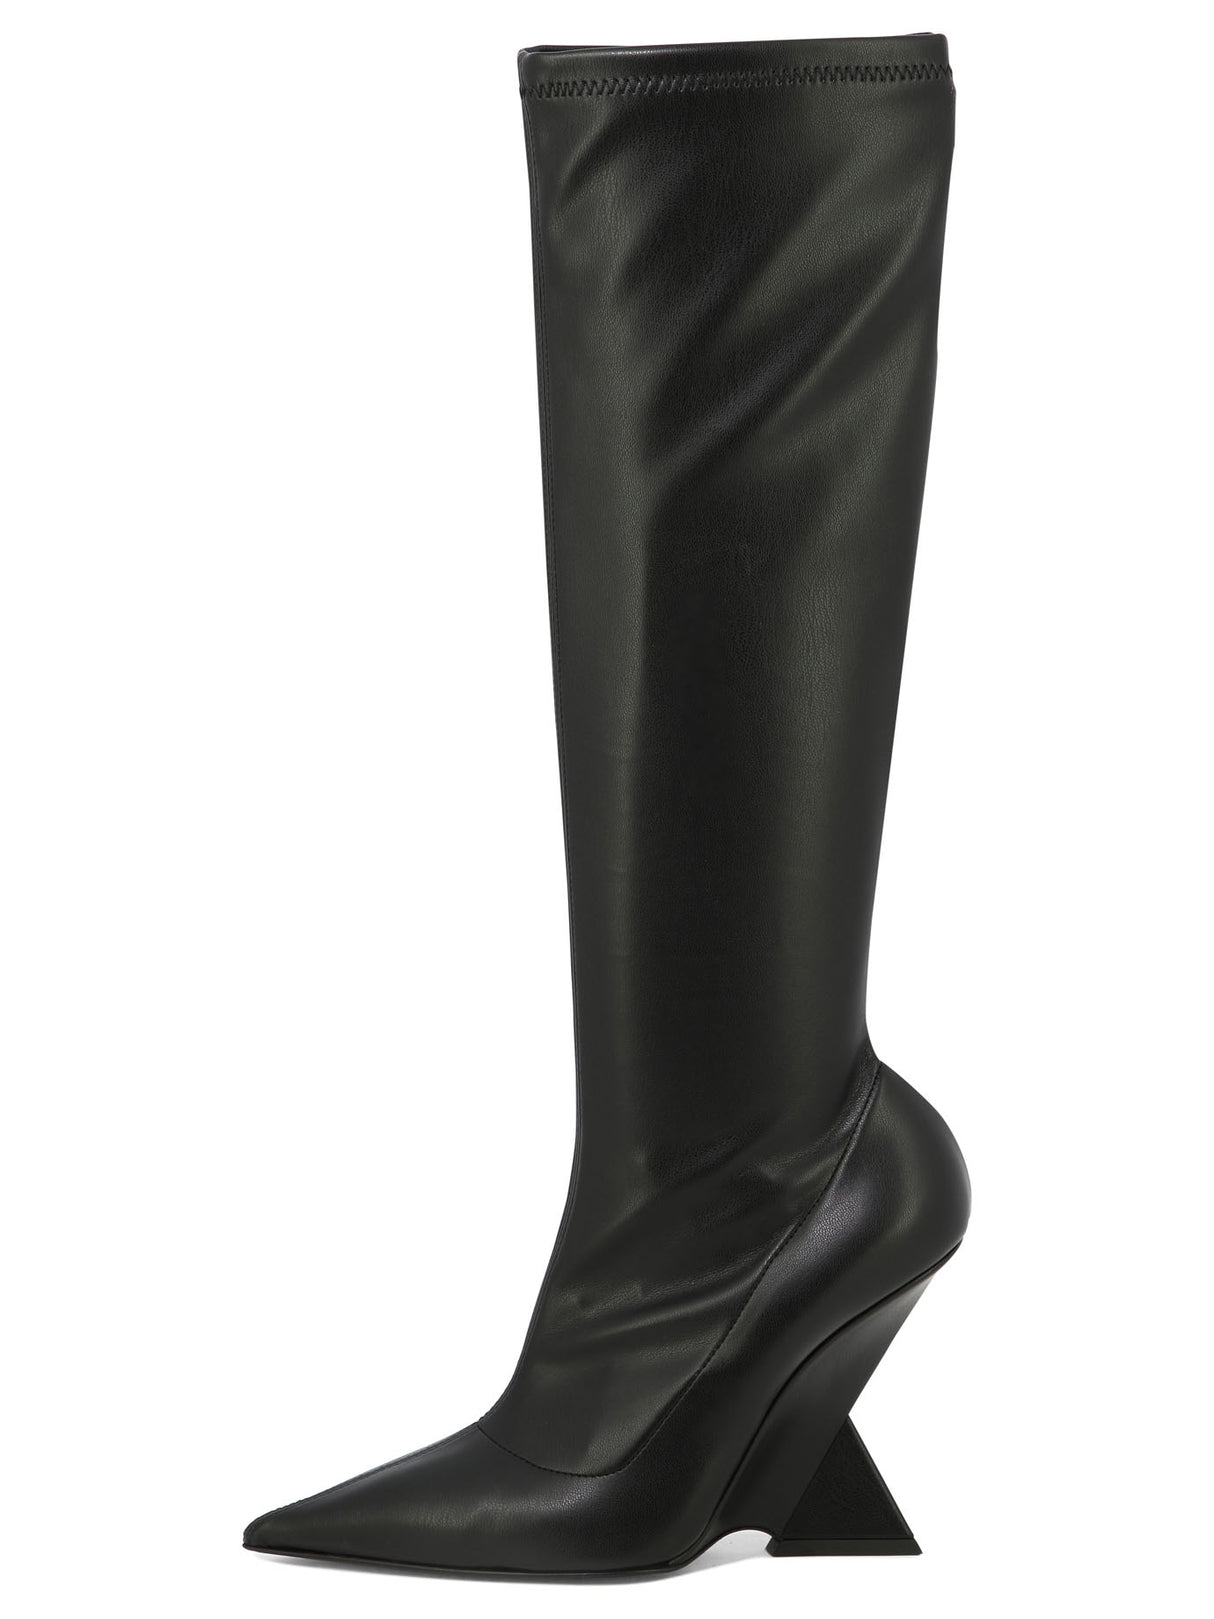 THE ATTICO Sleek and Sophisticated Black Leather Pull-On Boots